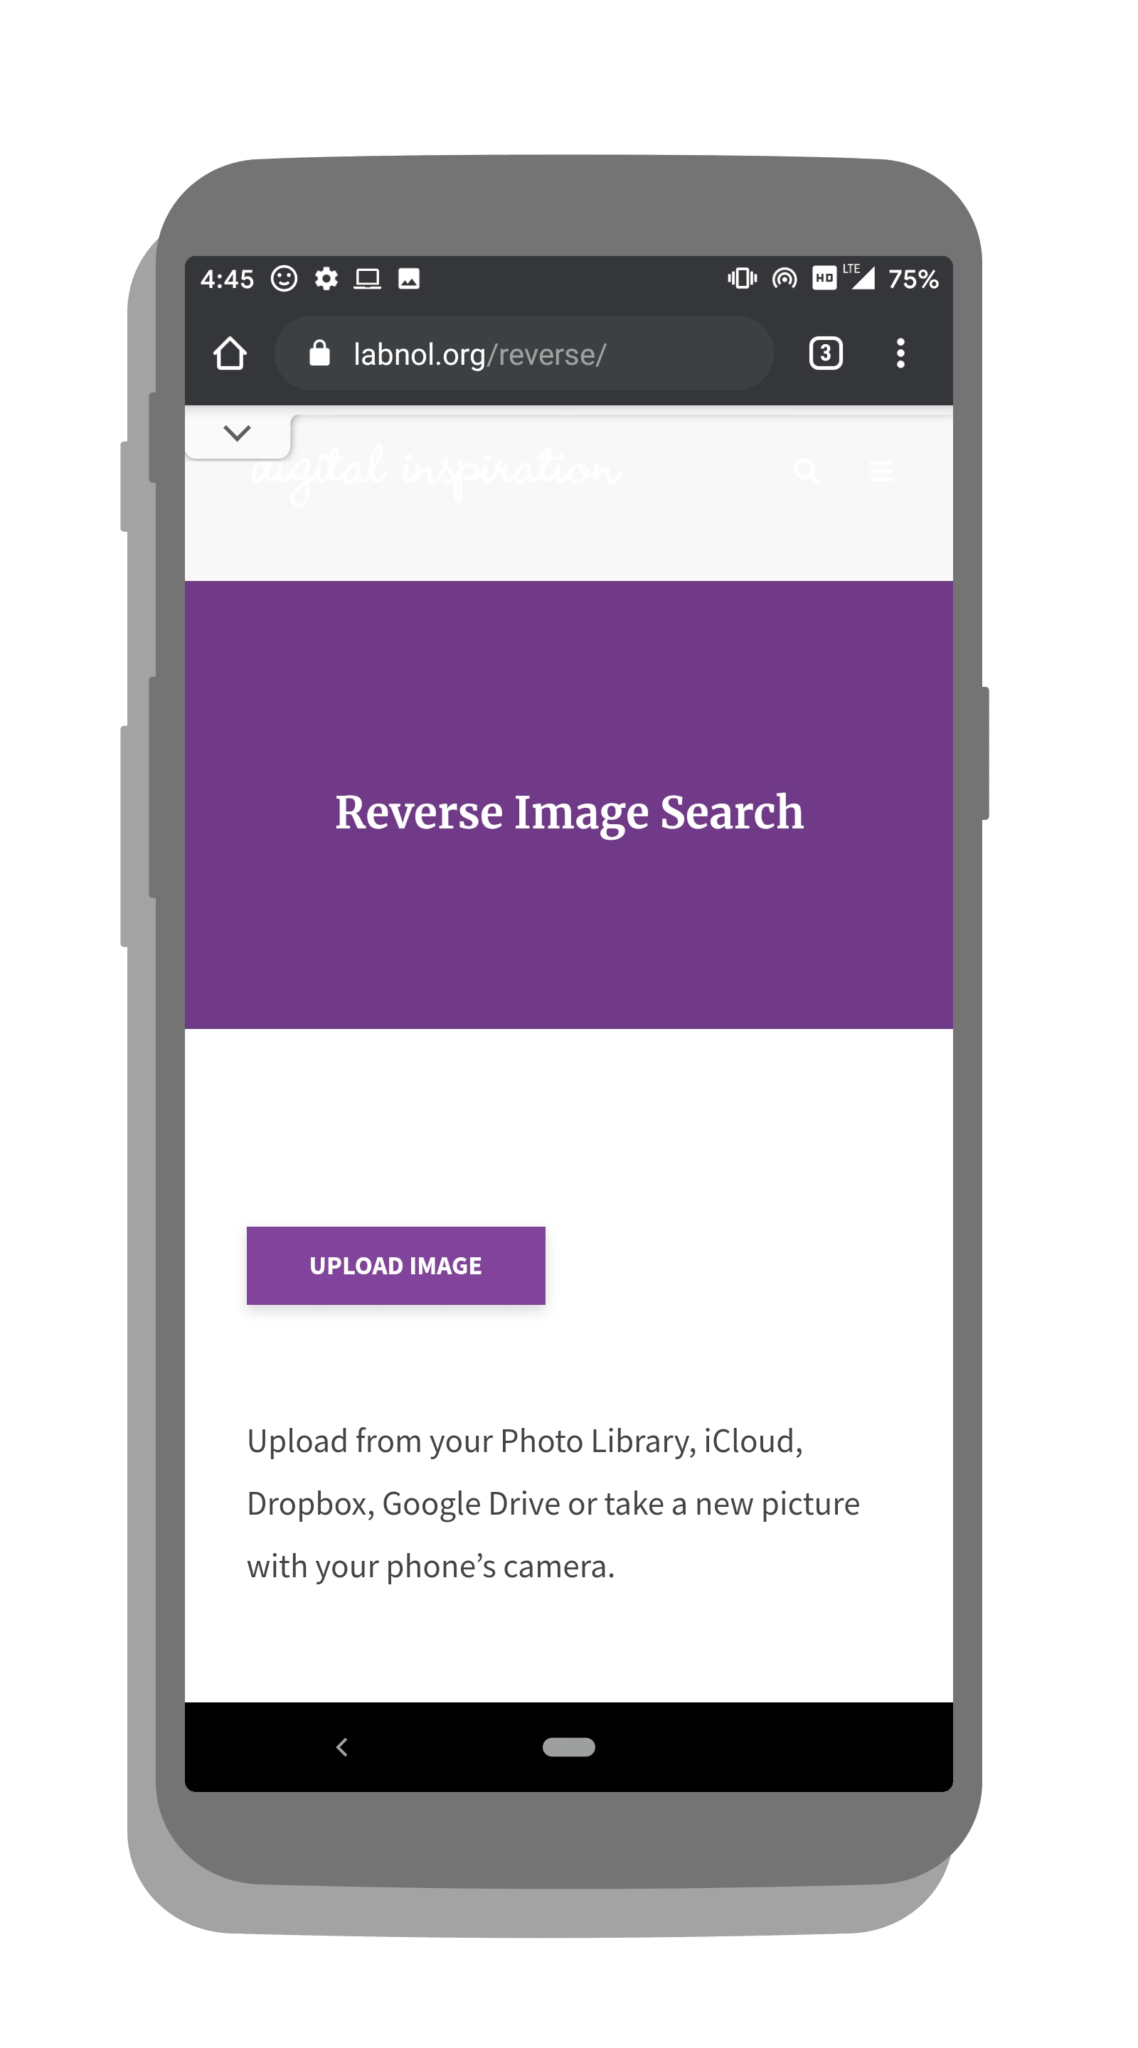 yandex reverse image search not working